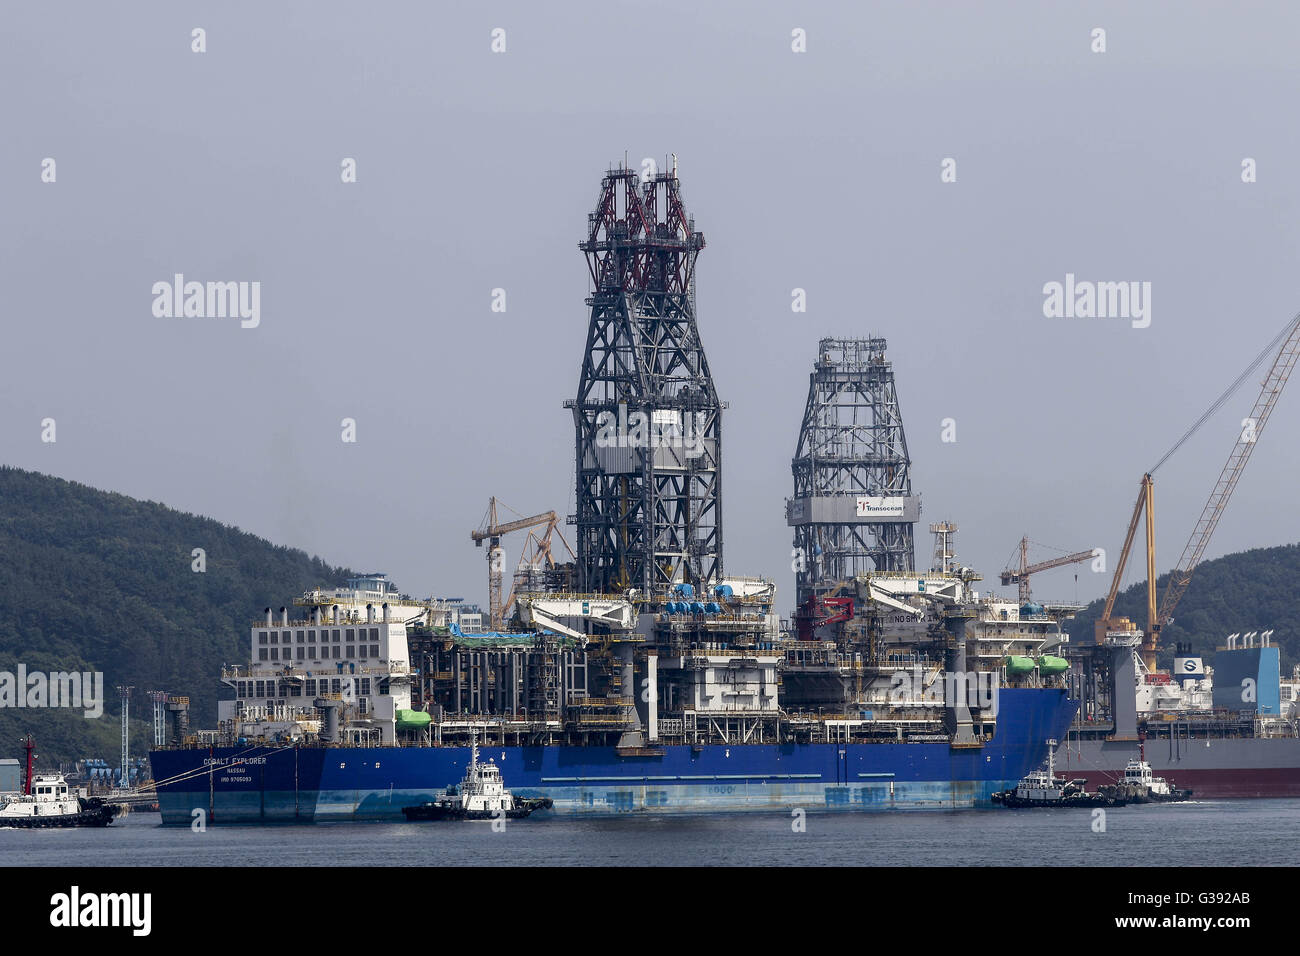 June 7, 2016 - Geoje, Gyeongnam, South Korea - Ships under construction sit moored at the DSME shipyard in Geoje, South Korea. Shipbuilding has been central to South Korea's economy since the 1970s. Ships accounted for 8.5 percent of the country's total exports through June 20 of October 2015, according to the trade ministry. After more than a decade of global dominance, South Korea's shipbuilders face an unprecedented crisis that threatens the very survival of one of the flagship industries of Asia's fourth largest economy. Major South Korean shipbuilders plan to restructure their operations  Stock Photo